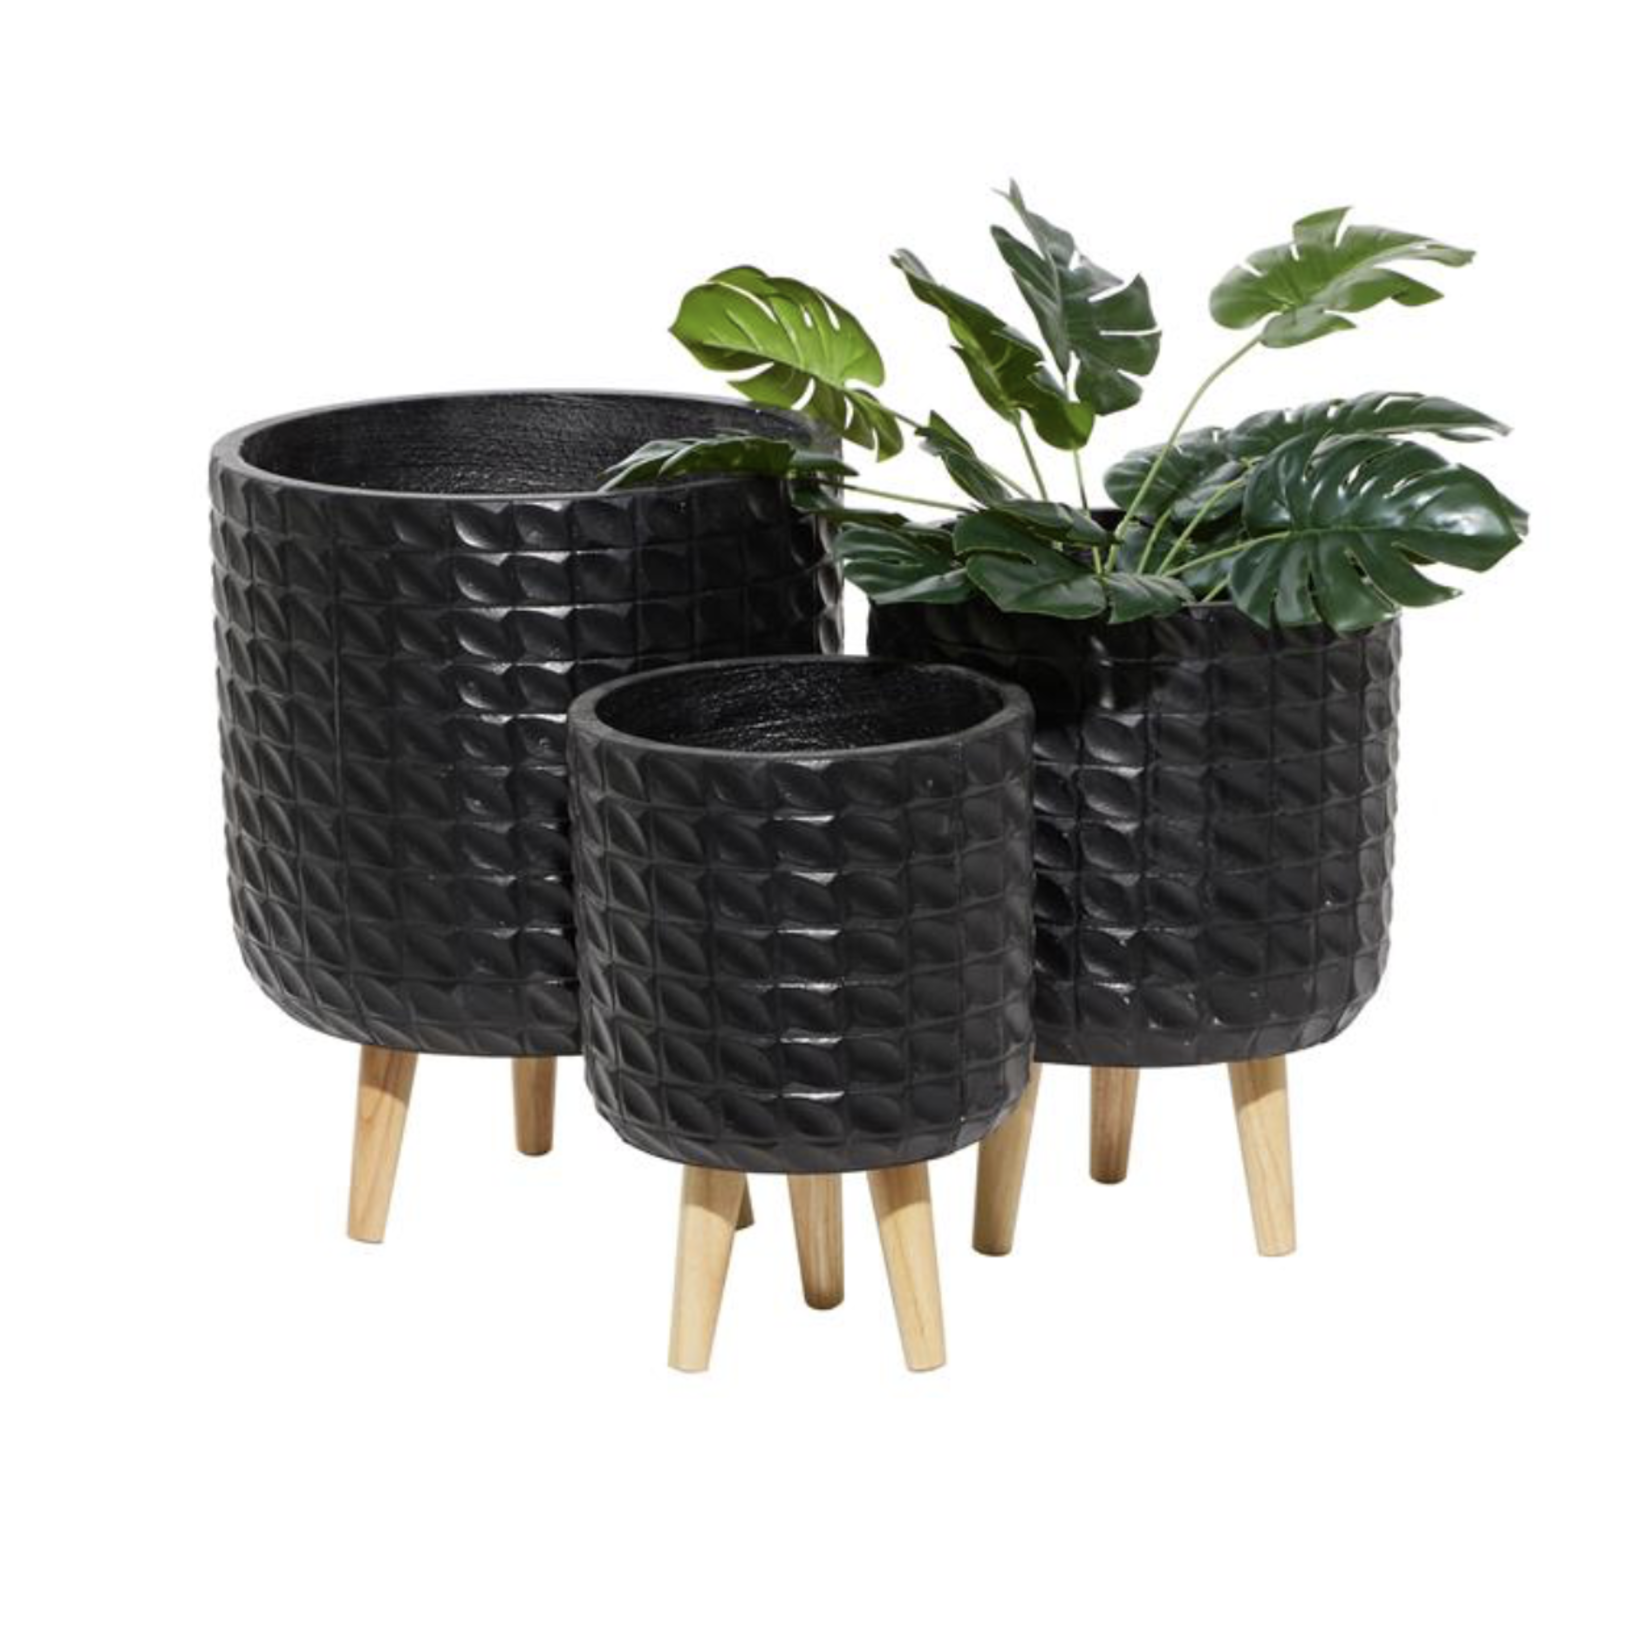 18”H X 14” LARGE  MAGNESIUM OXIDE INDOOR OUTDOOR PLANTER WITH WOOD LEGS (NOT WATER TIGHT)